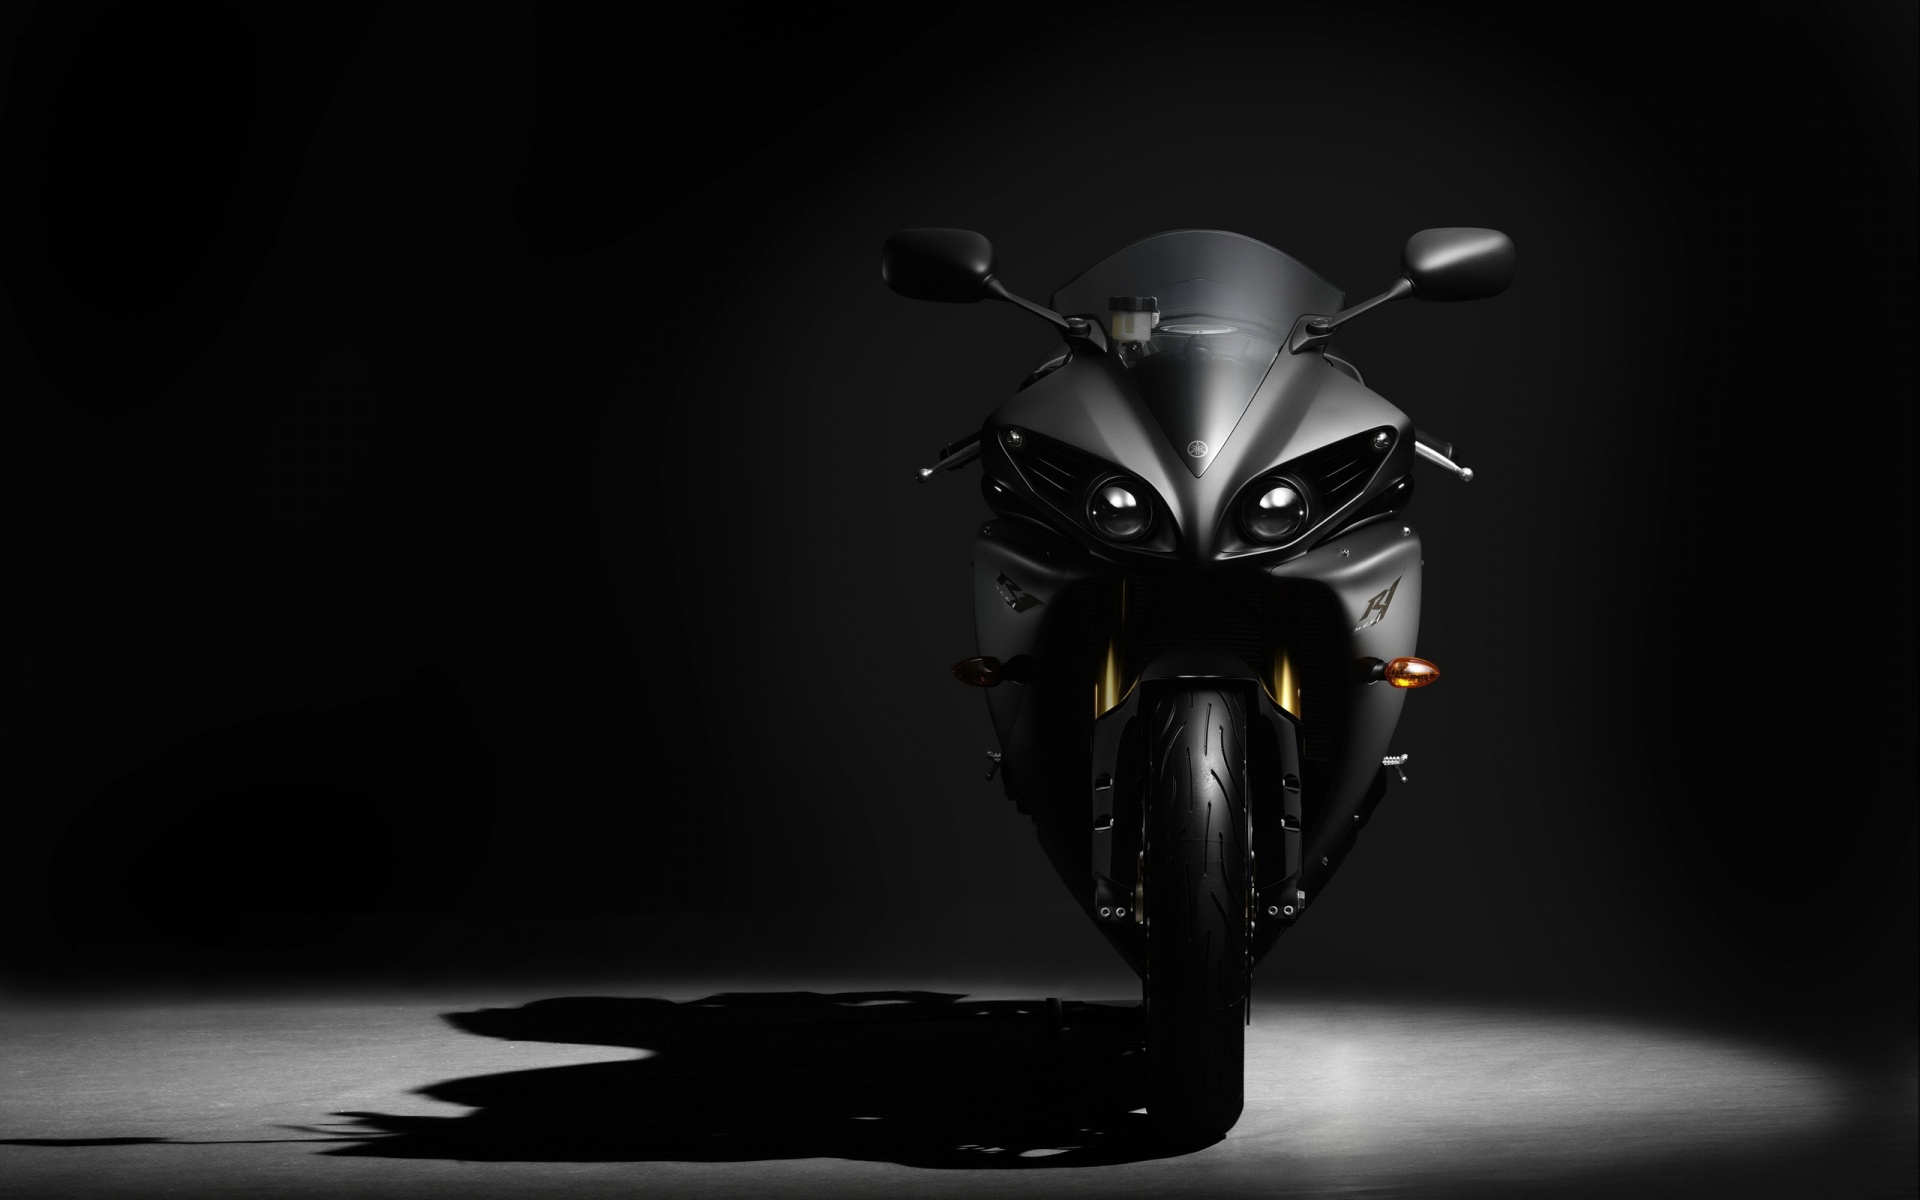 Best Mobile Motorcycles Backgrounds